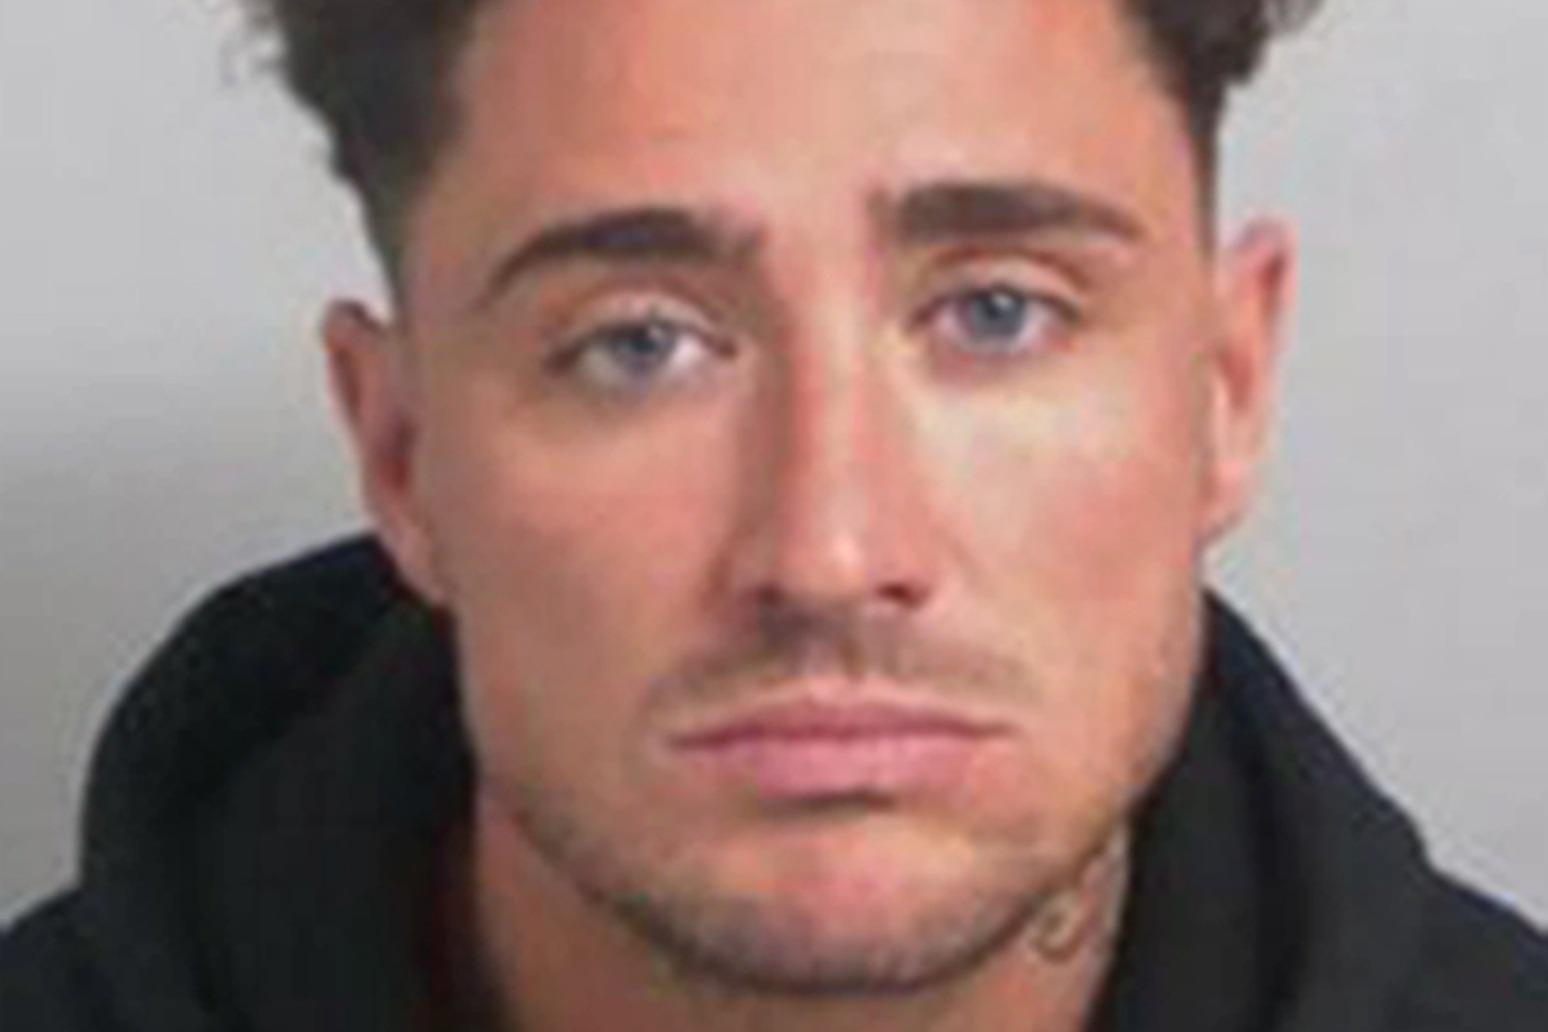 Banbury Sex Videos - Reality TV star Stephen Bear guilty of sharing sex video on OnlyFans -  Banbury FM